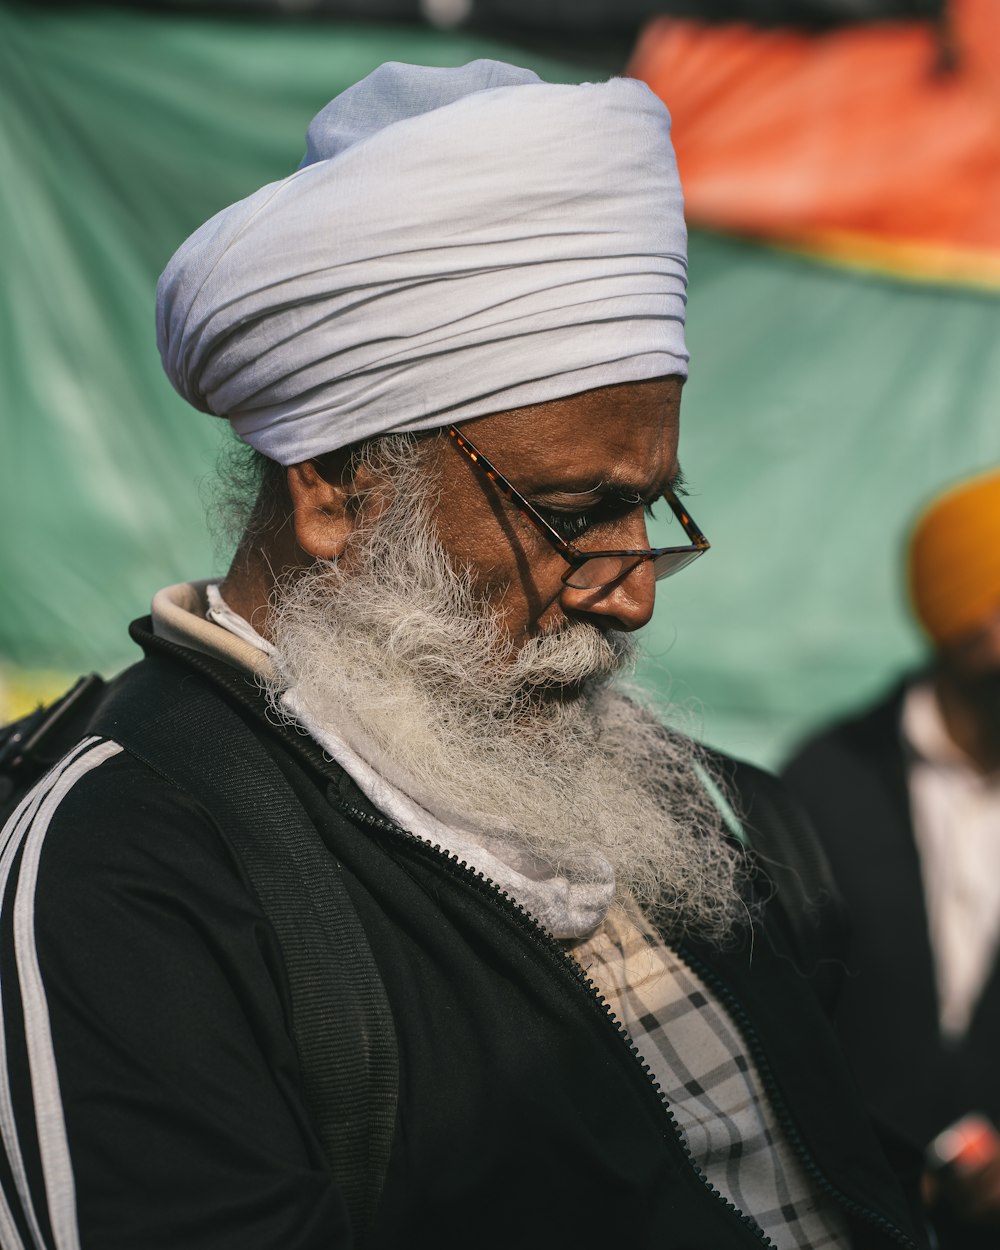 a man with a white turban is looking at his cell phone